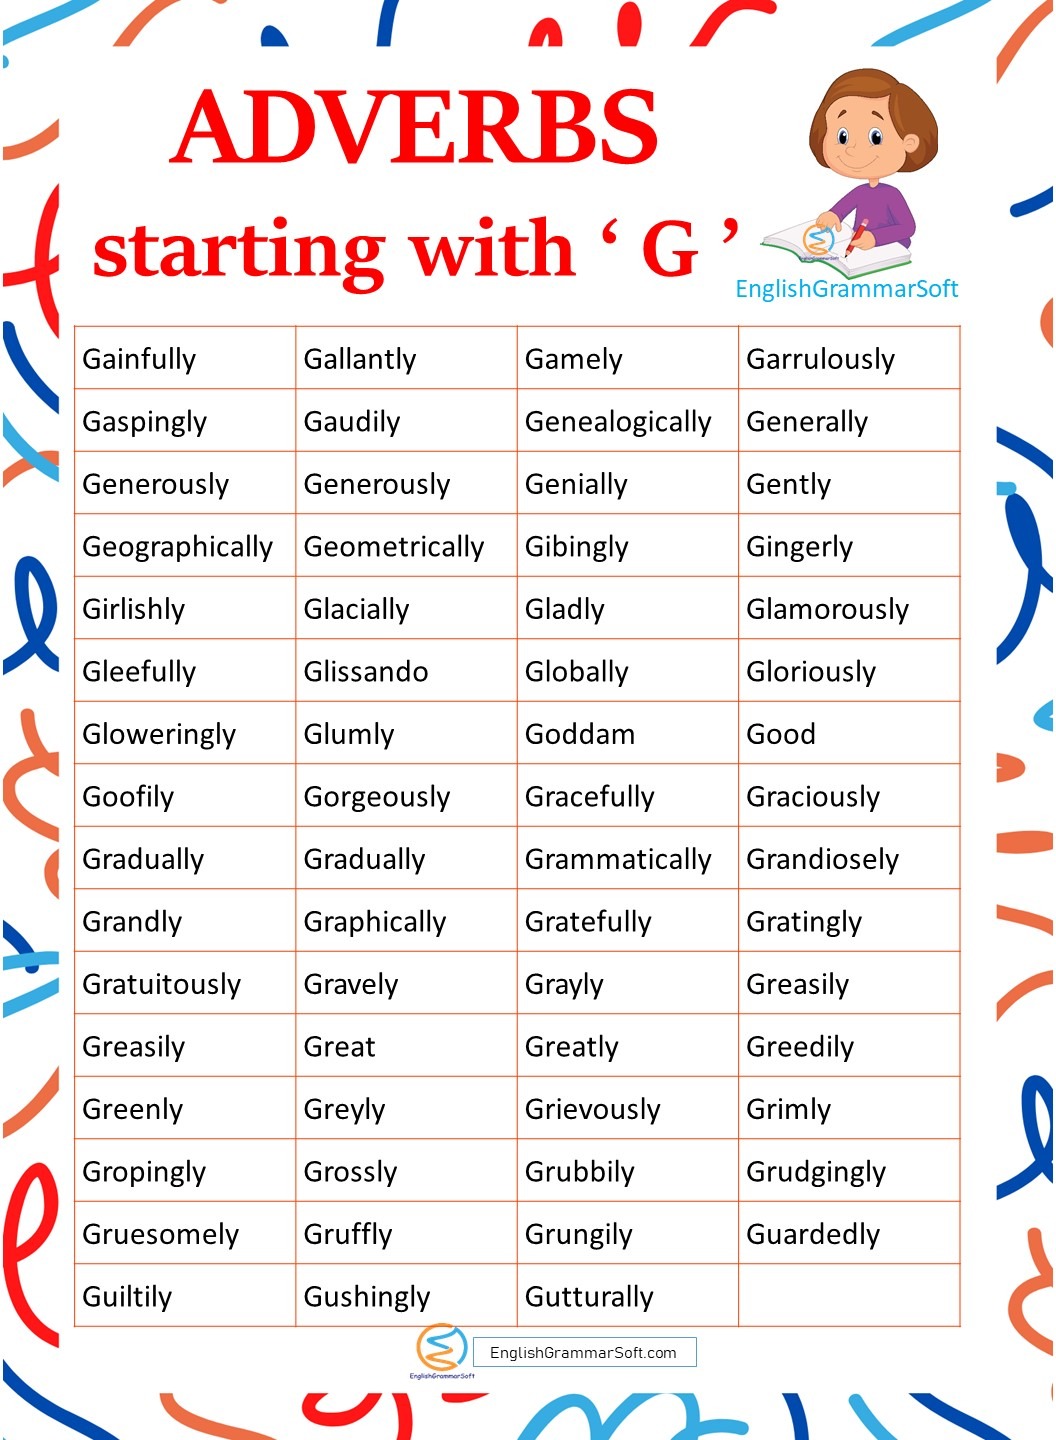 adverbs starting with g